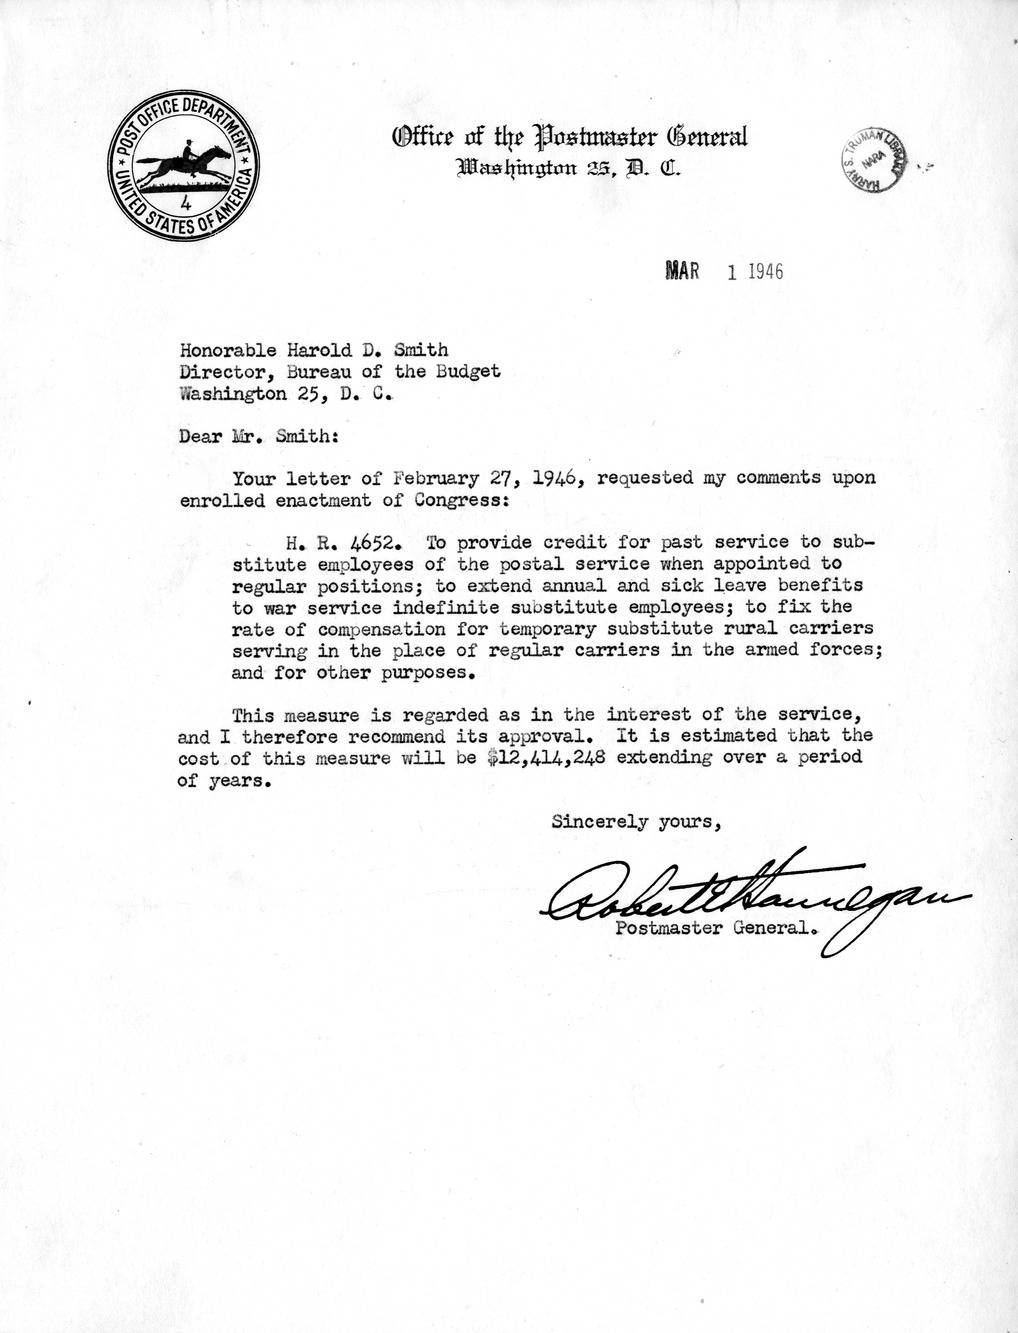 Memorandum from Paul H. Appleby to M. C. Latta, H. R. 4652, To Provide Credit for Past Service to Substitute Employees of the Postal Service When Appointed to Regular Positions; To Extend Annual and Sick Leave Benefits to War Service Indefinite Service Employees; to Fix the Rate of Compensation for Temporary Service Rural Carriers Serving in the Place of Regular Carriers in the Armed Forces, with Attachments